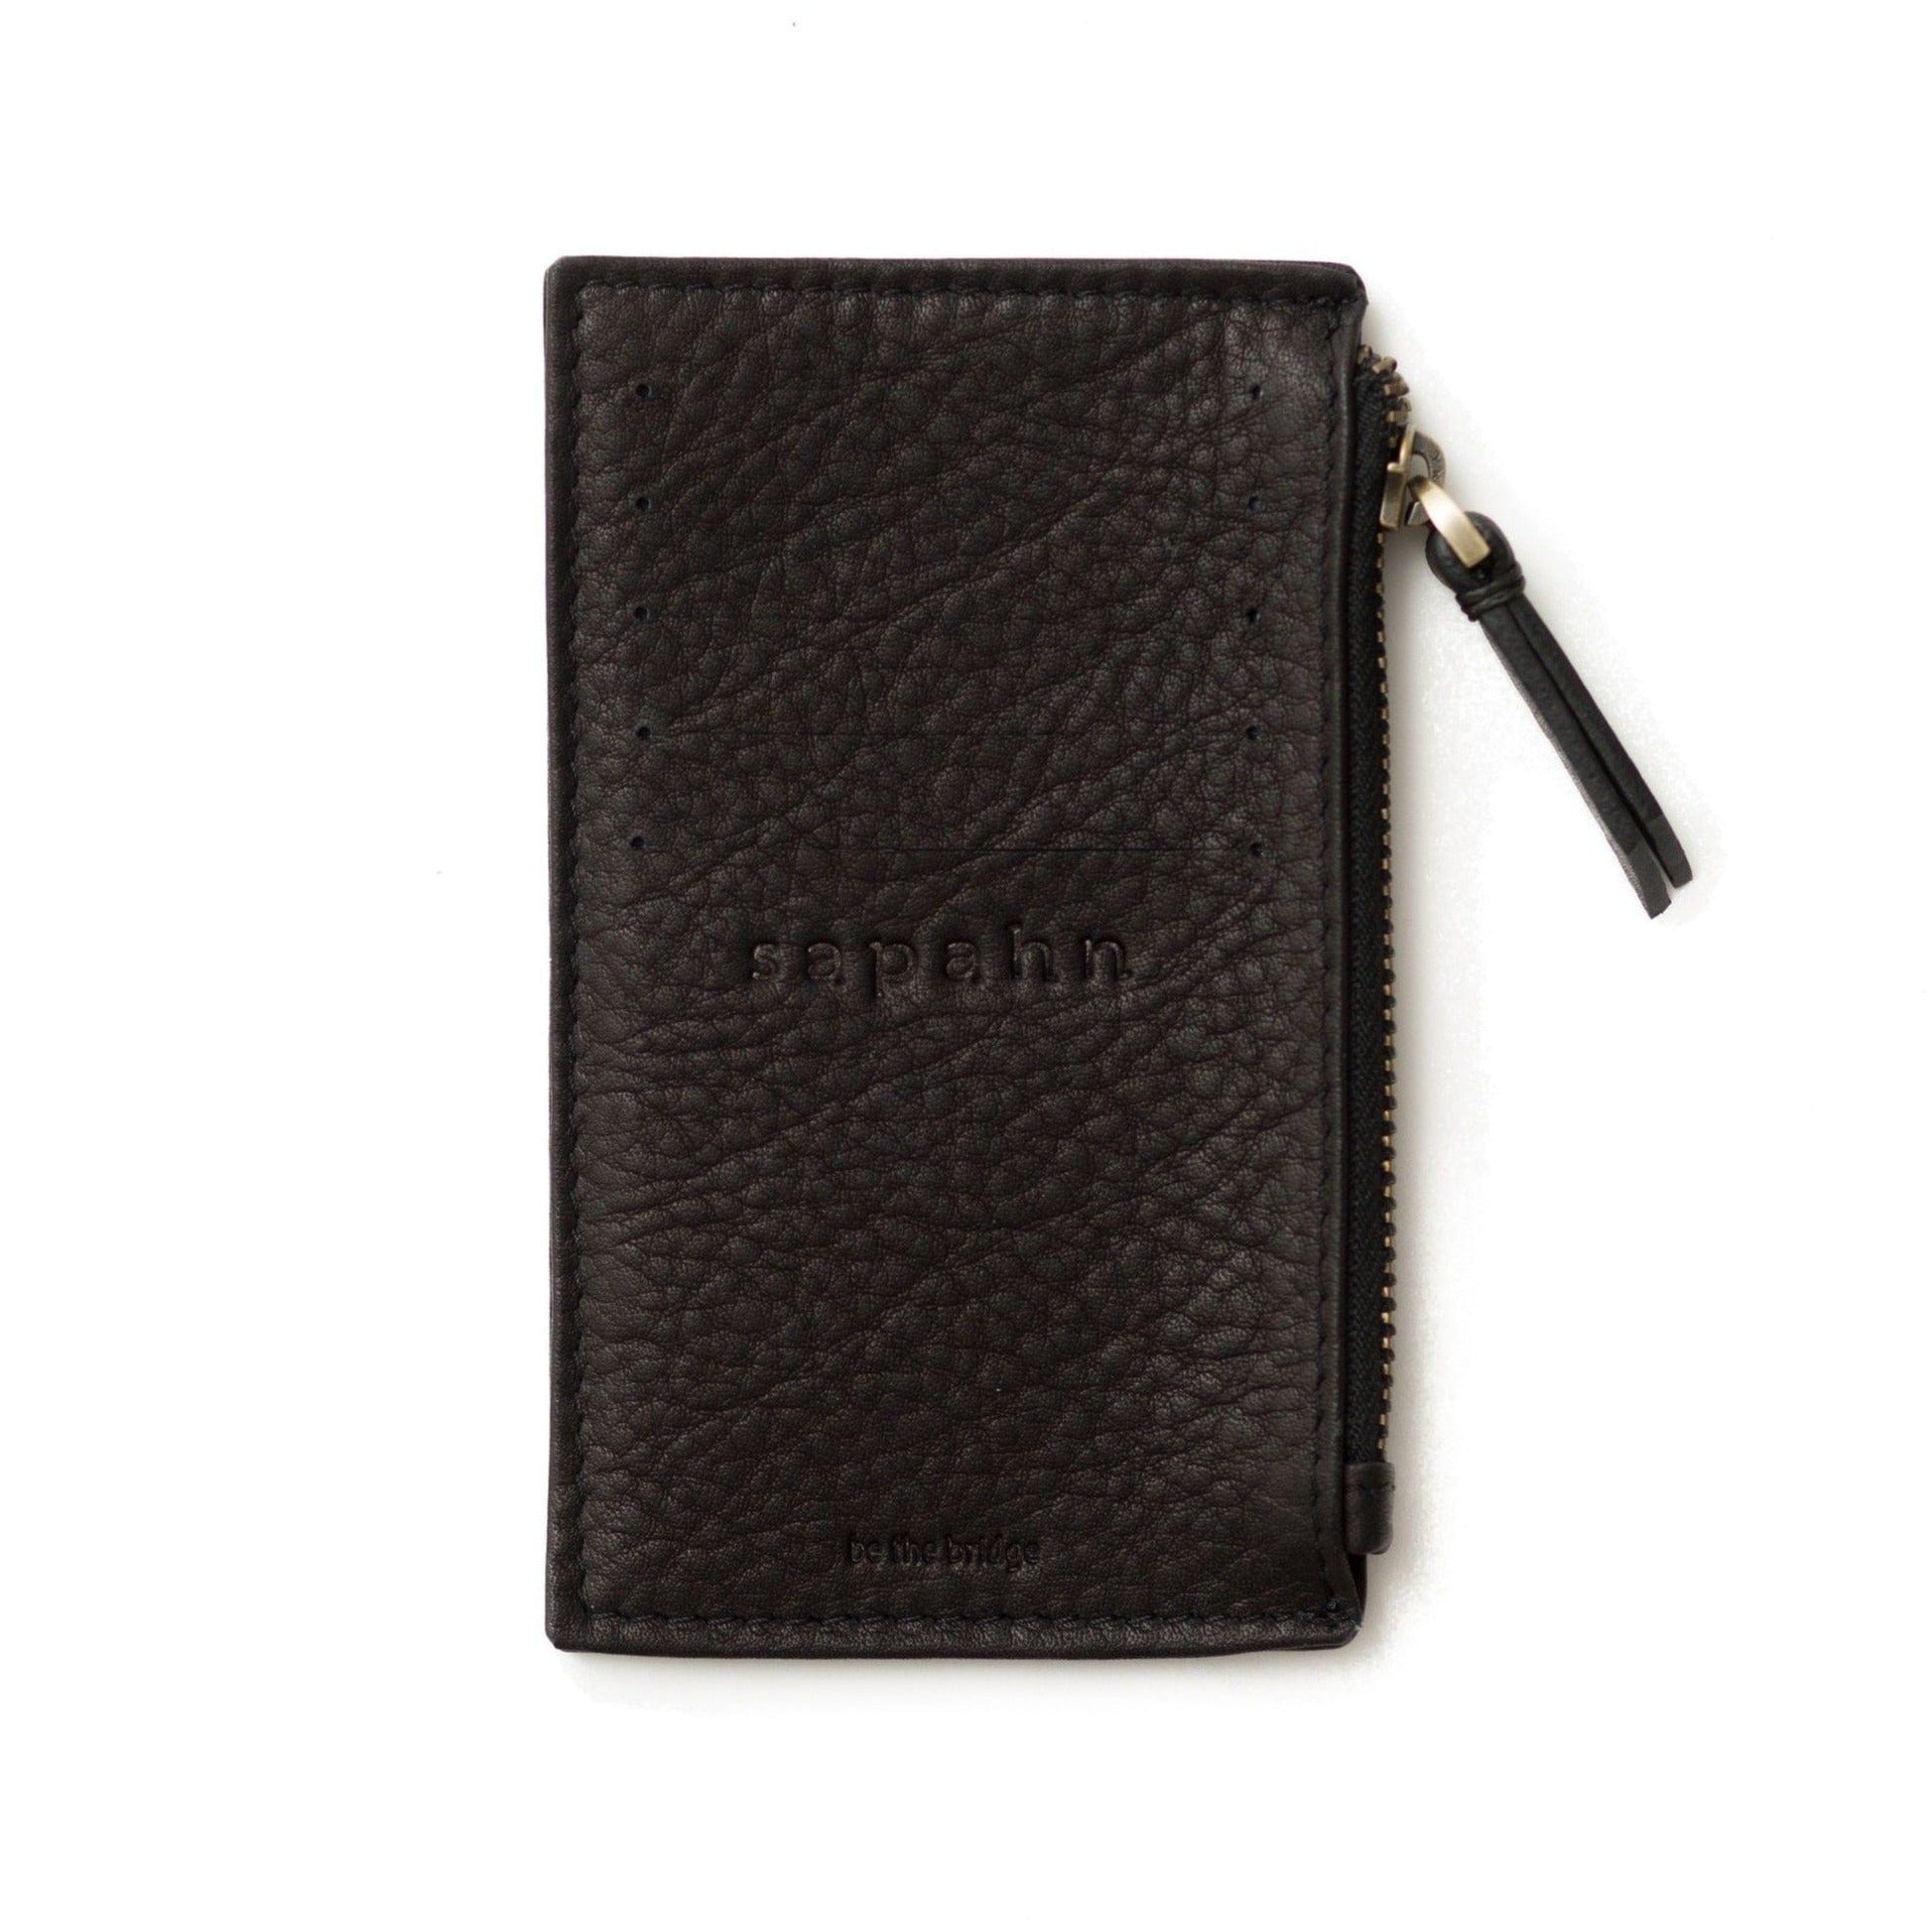 Black raw leather Emma card holder wallet features 5 external card slots and a subtle Sapahn logo.